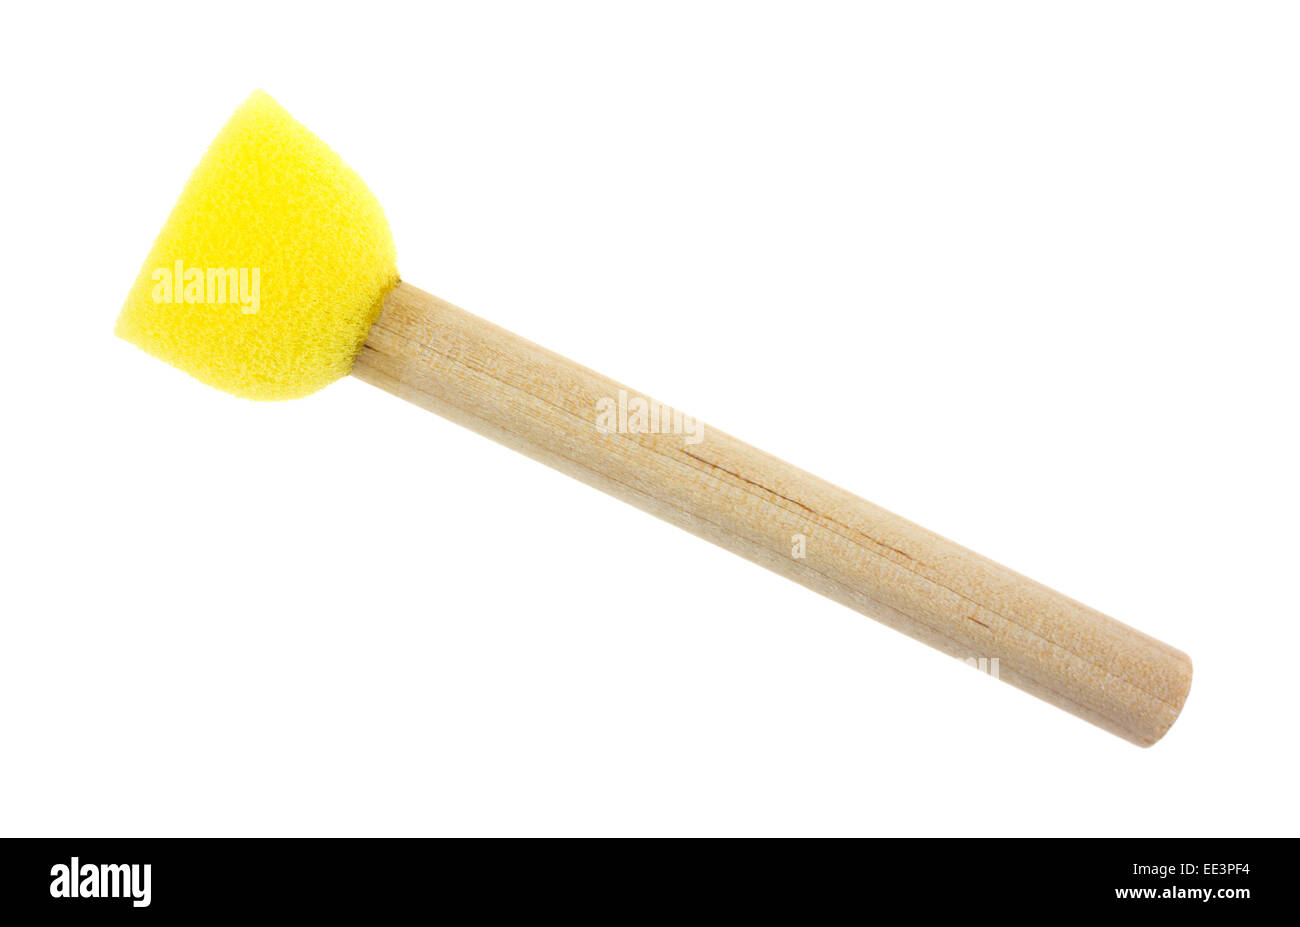 A yellow foam brush used for stenciling on a white background. Stock Photo